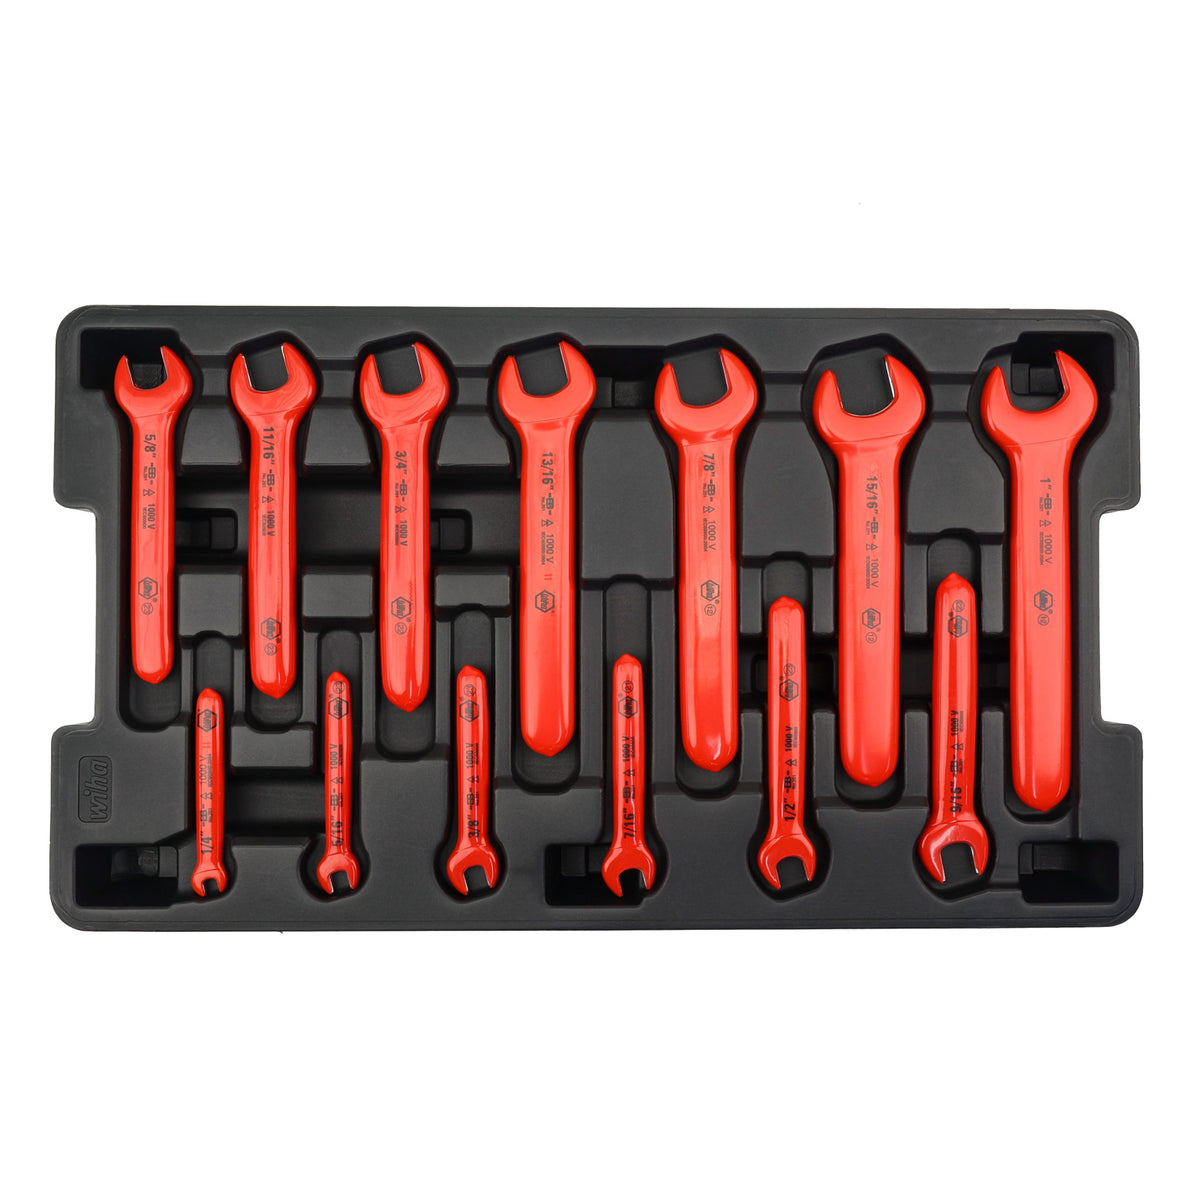 Wiha 20196 13 Piece Insulated Open End Wrench Tray Set - Metric